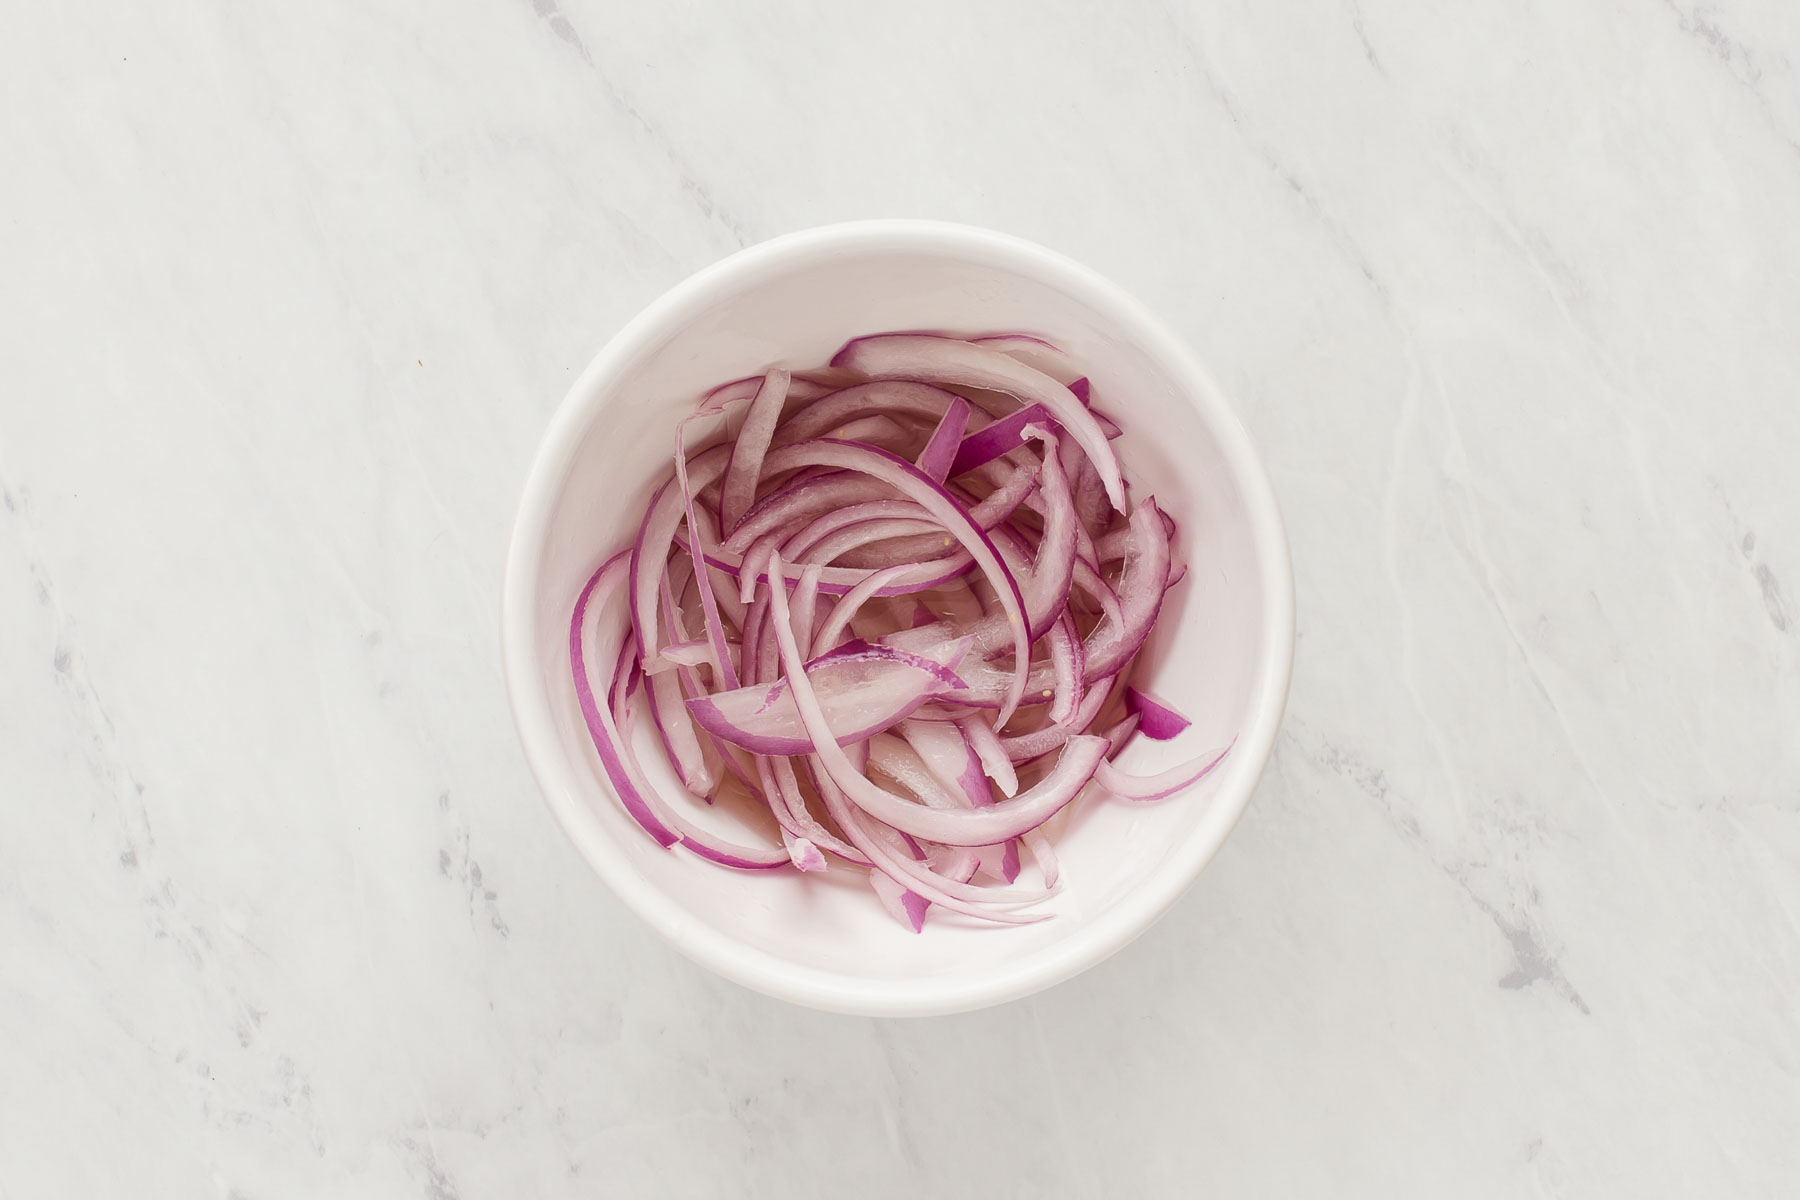 Thinly sliced red onion in small white bowl.